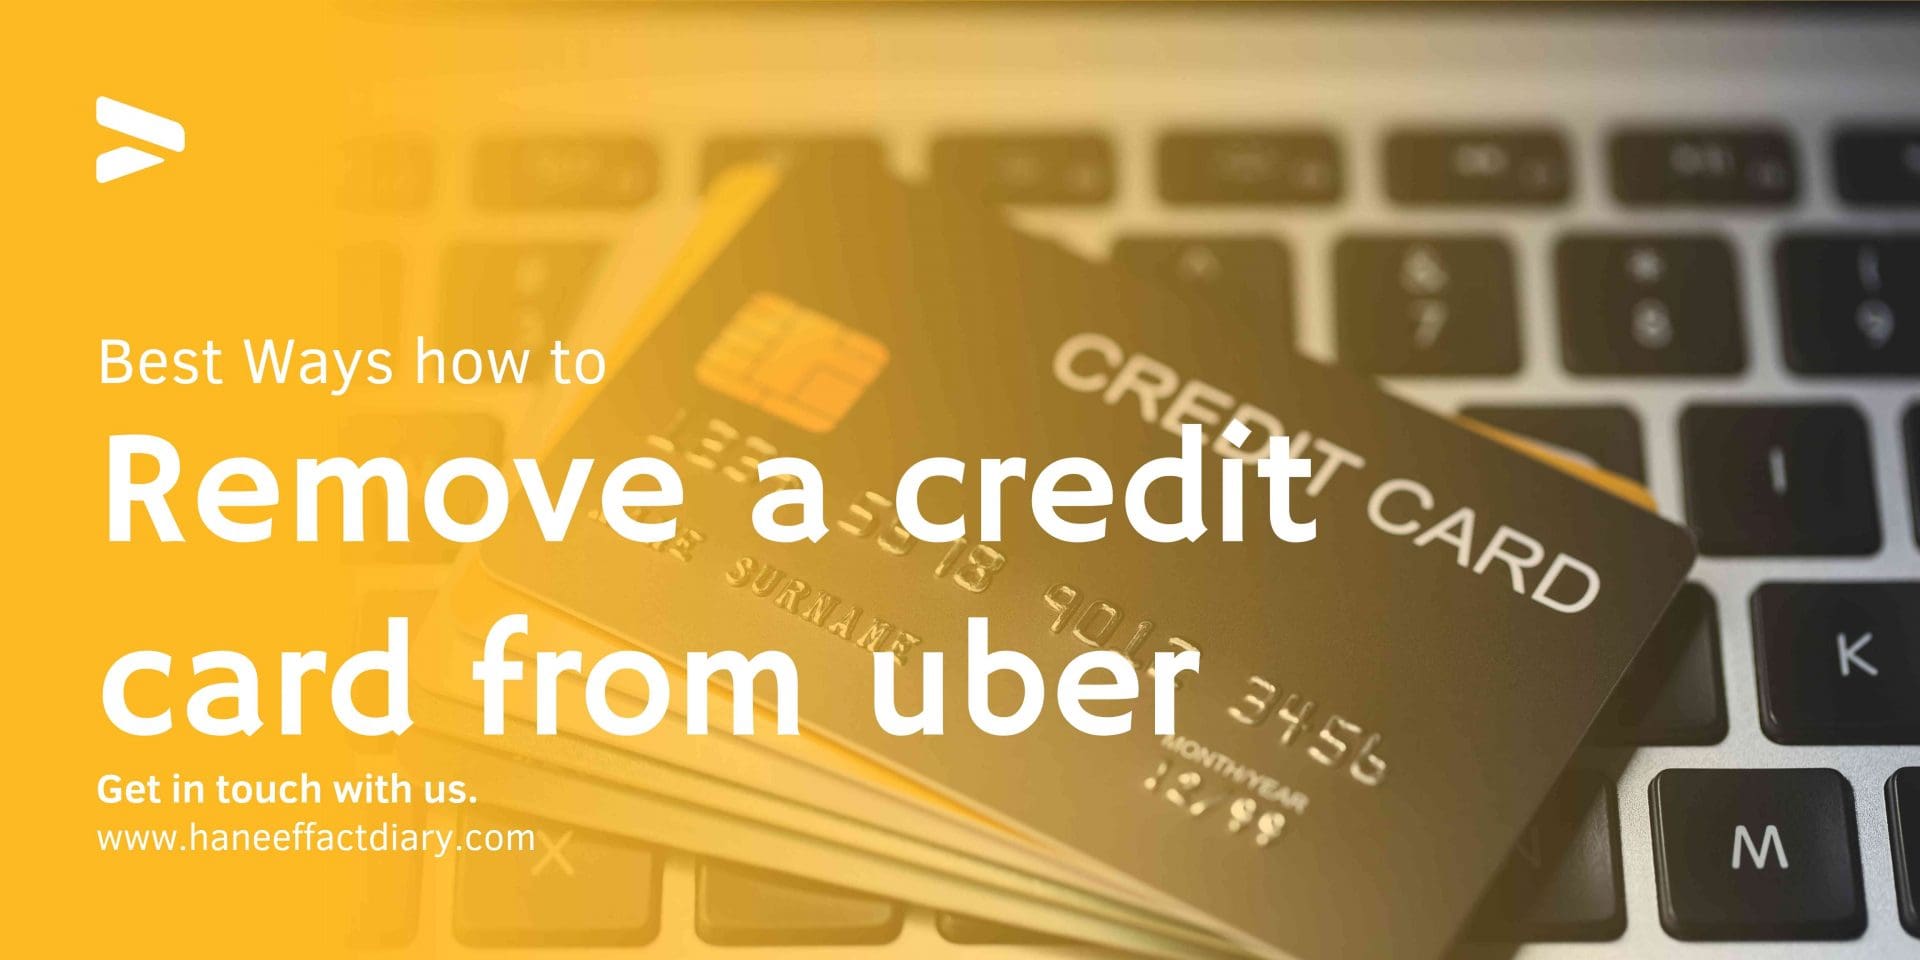 Best Ways how to remove a credit card from uber 2022